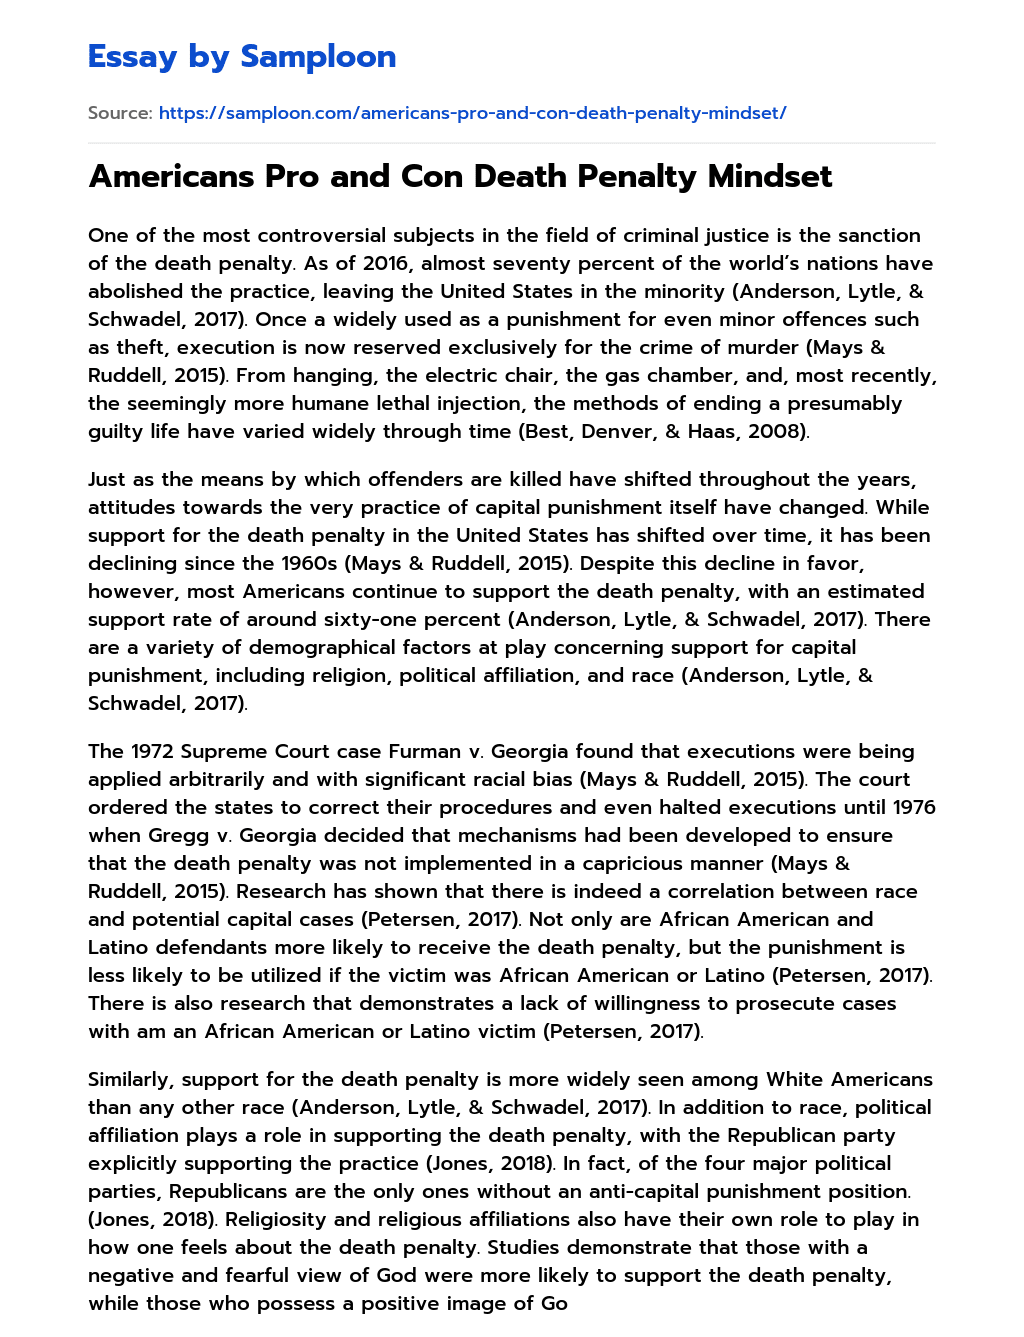 Americans Pro and Con Death Penalty Mindset essay